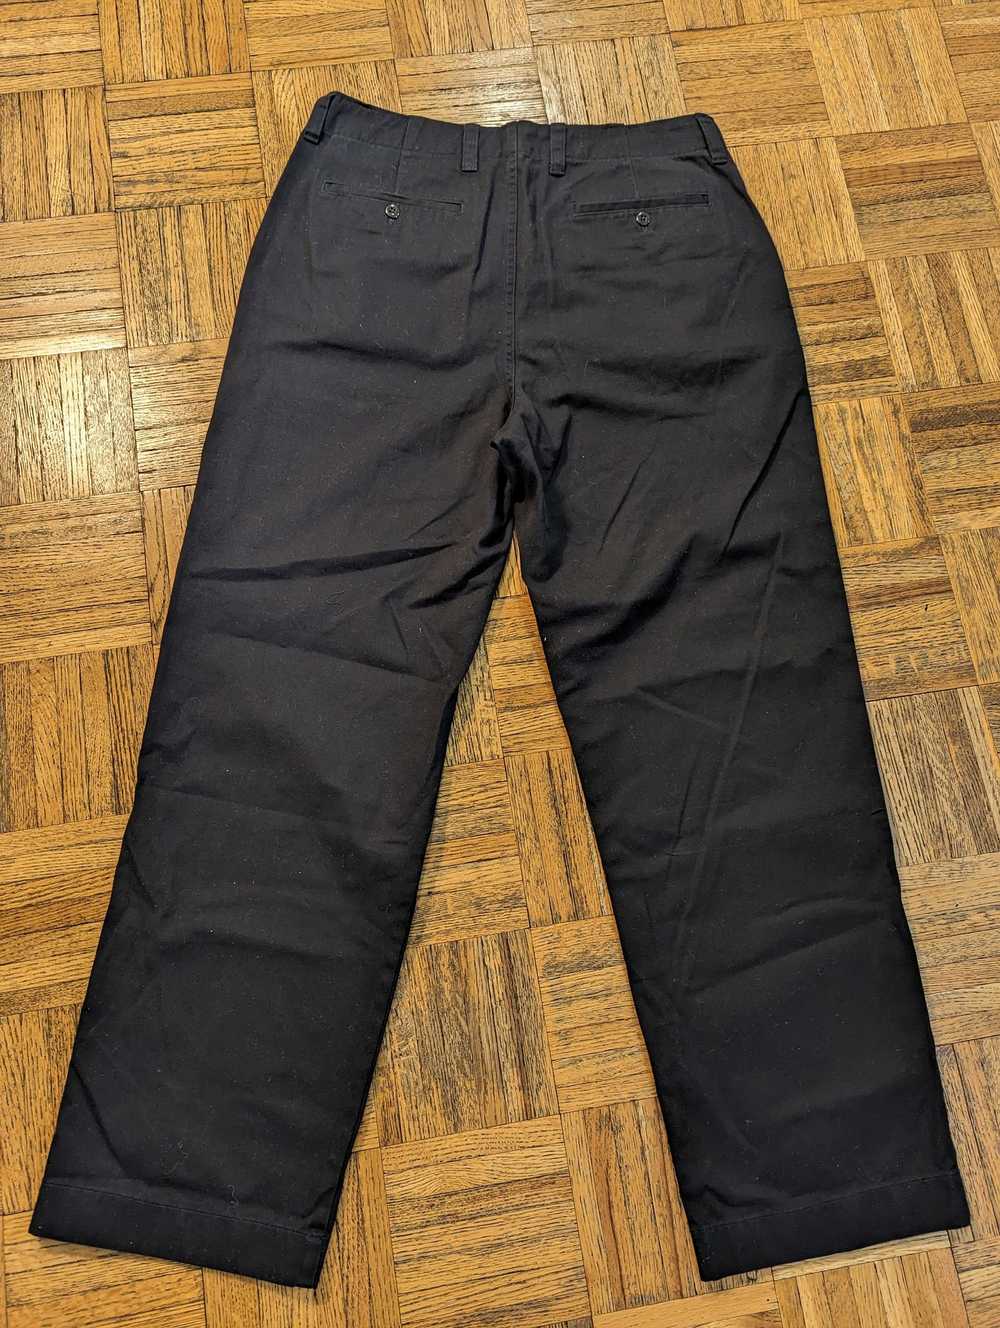 Todd Snyder Pants, new with tags - image 10